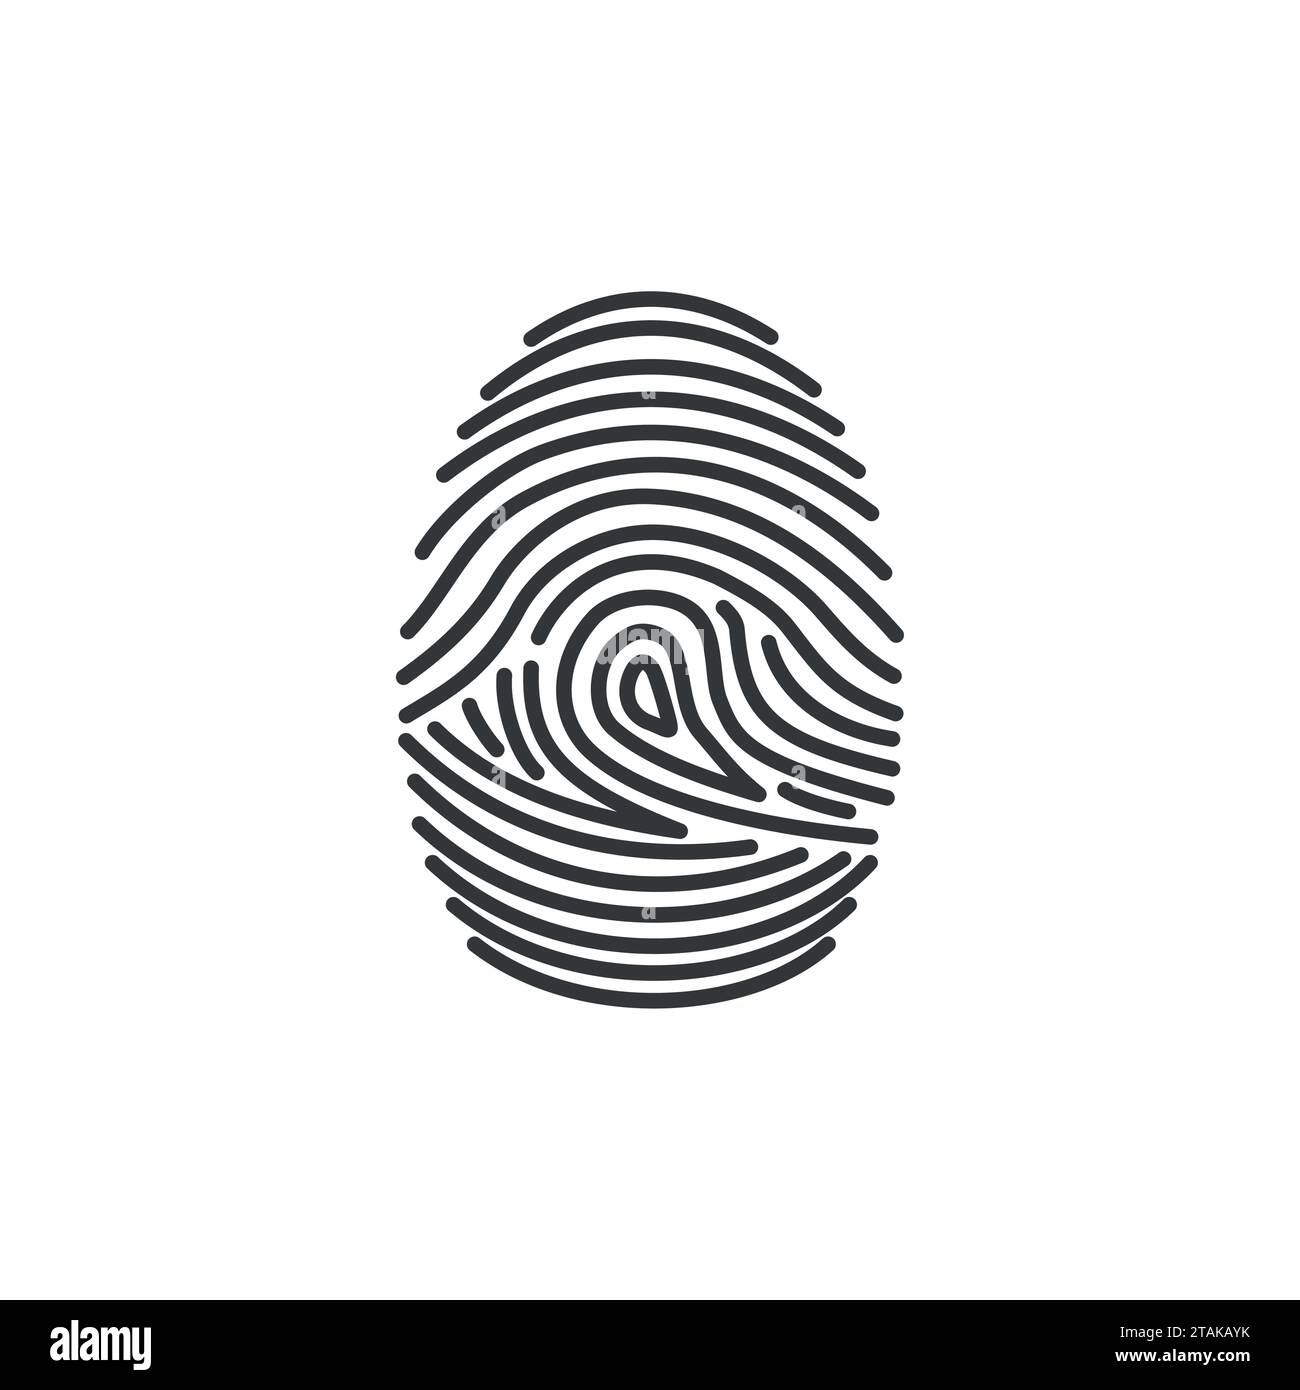 Fingerprint icon identification isolated on white background. Security and surveillance system Stock Vector